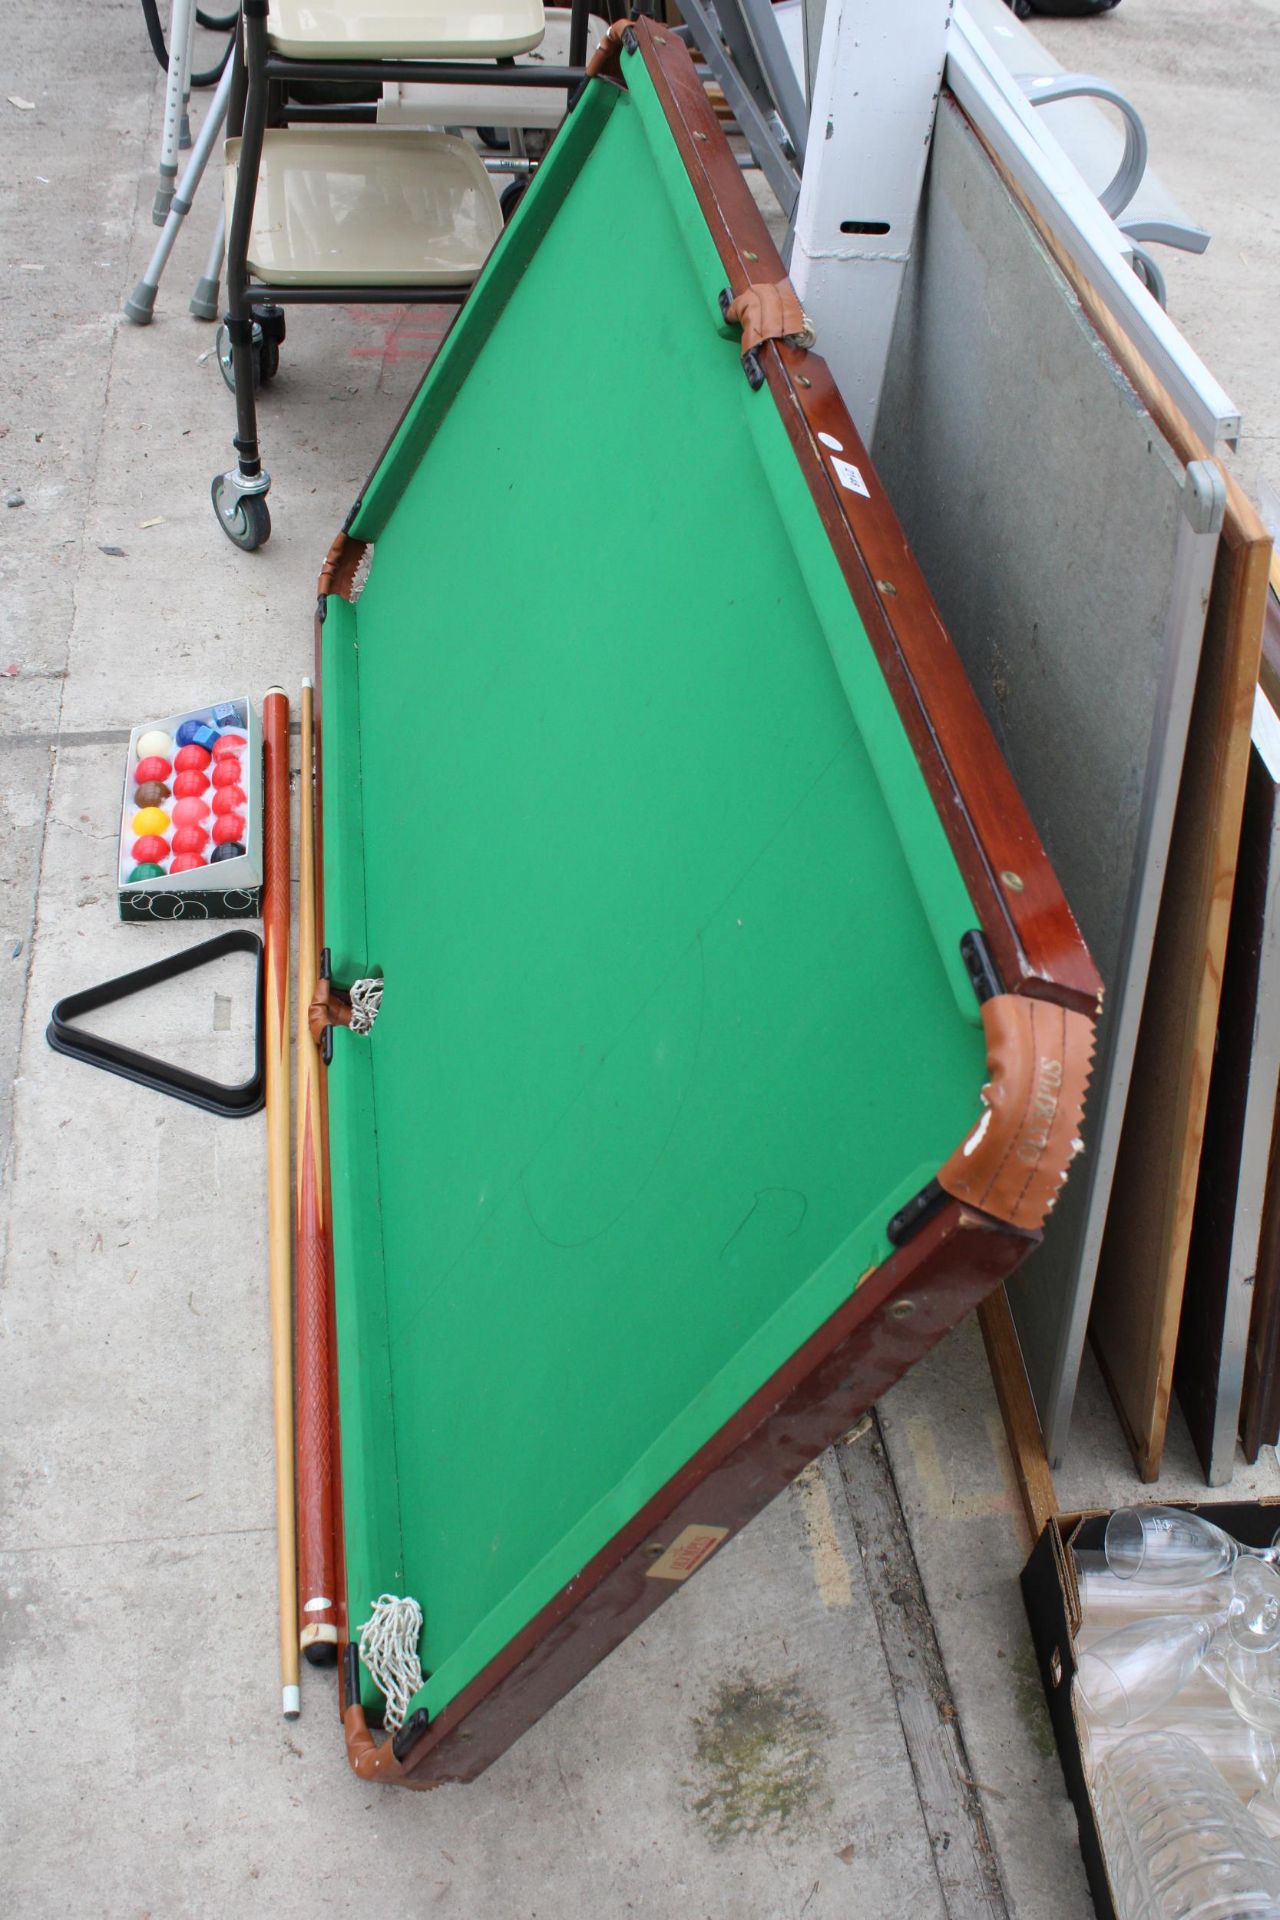 A TABLE TOP POOL TABLE, CUES AND BALLS ETC - Image 3 of 3